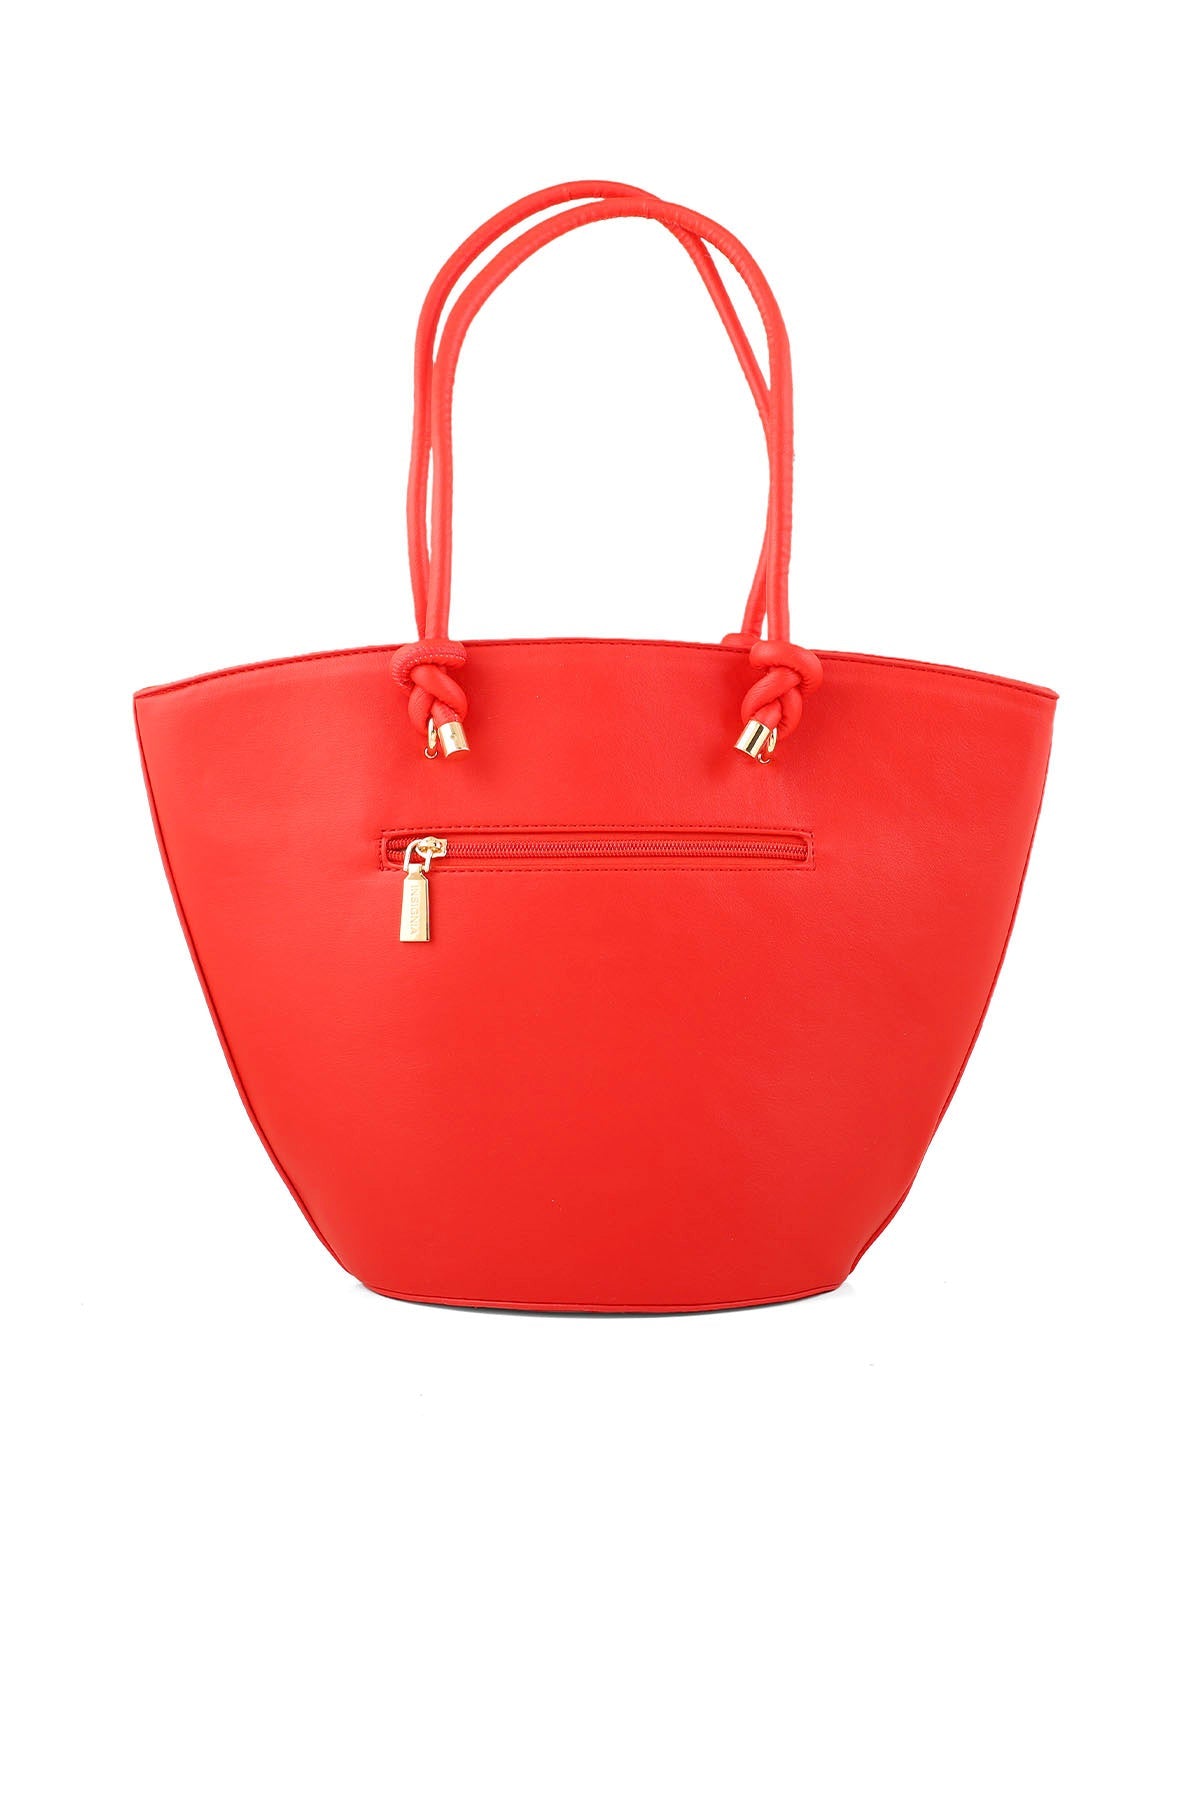 Bucket Hand Bags B15077-Red